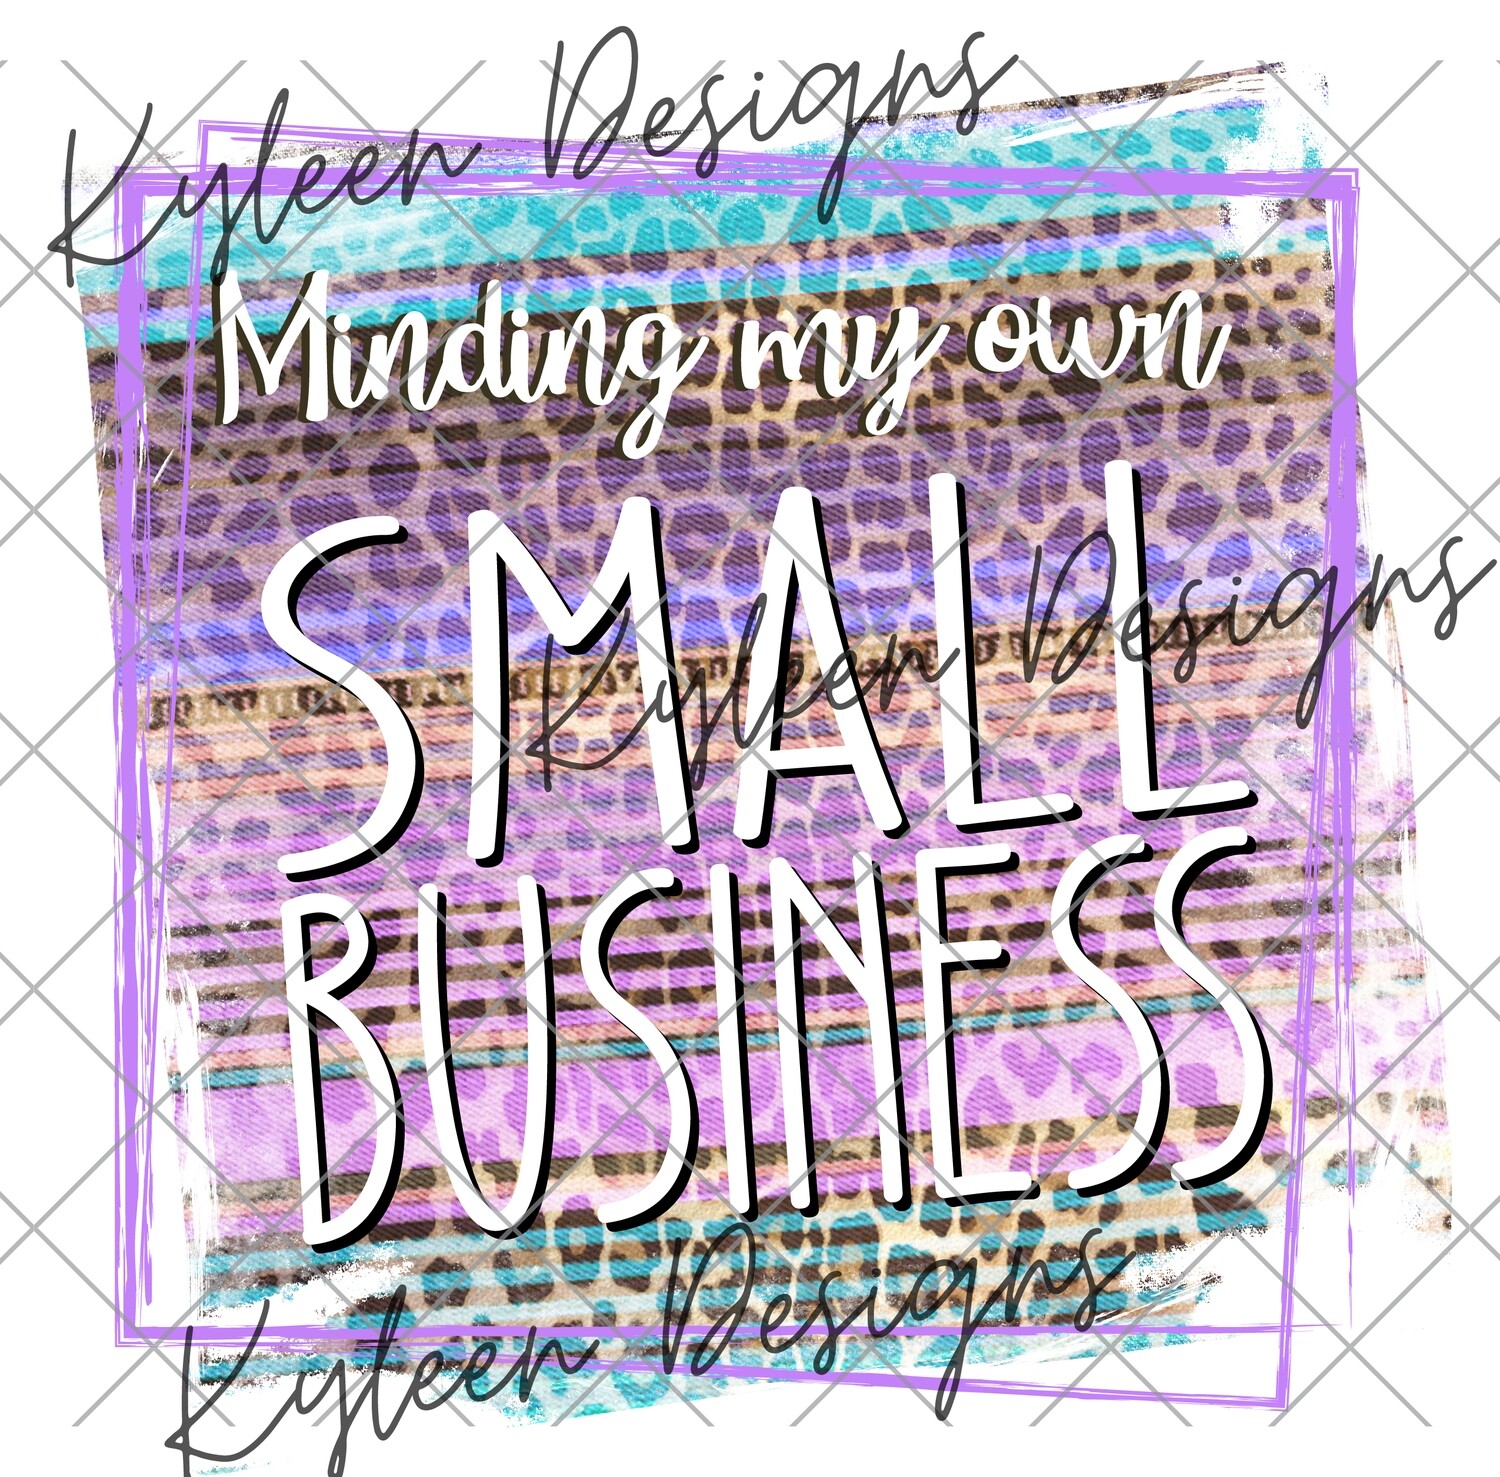 Minding my own small business...PNG DIGITAL FILE- high res 300 dpi